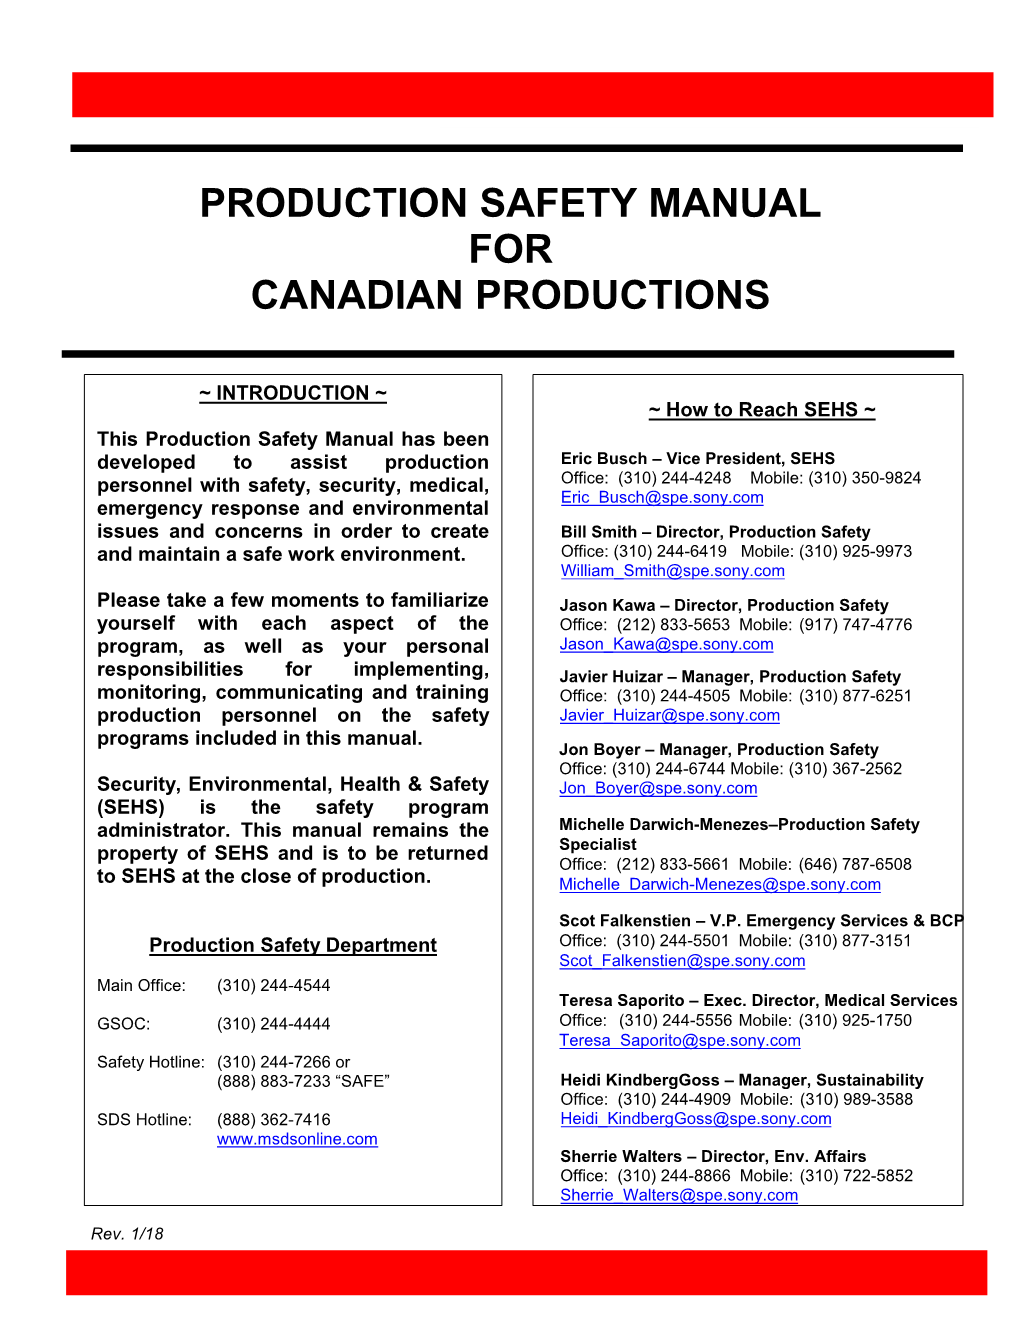 Production Safety Manual for Canadian Productions